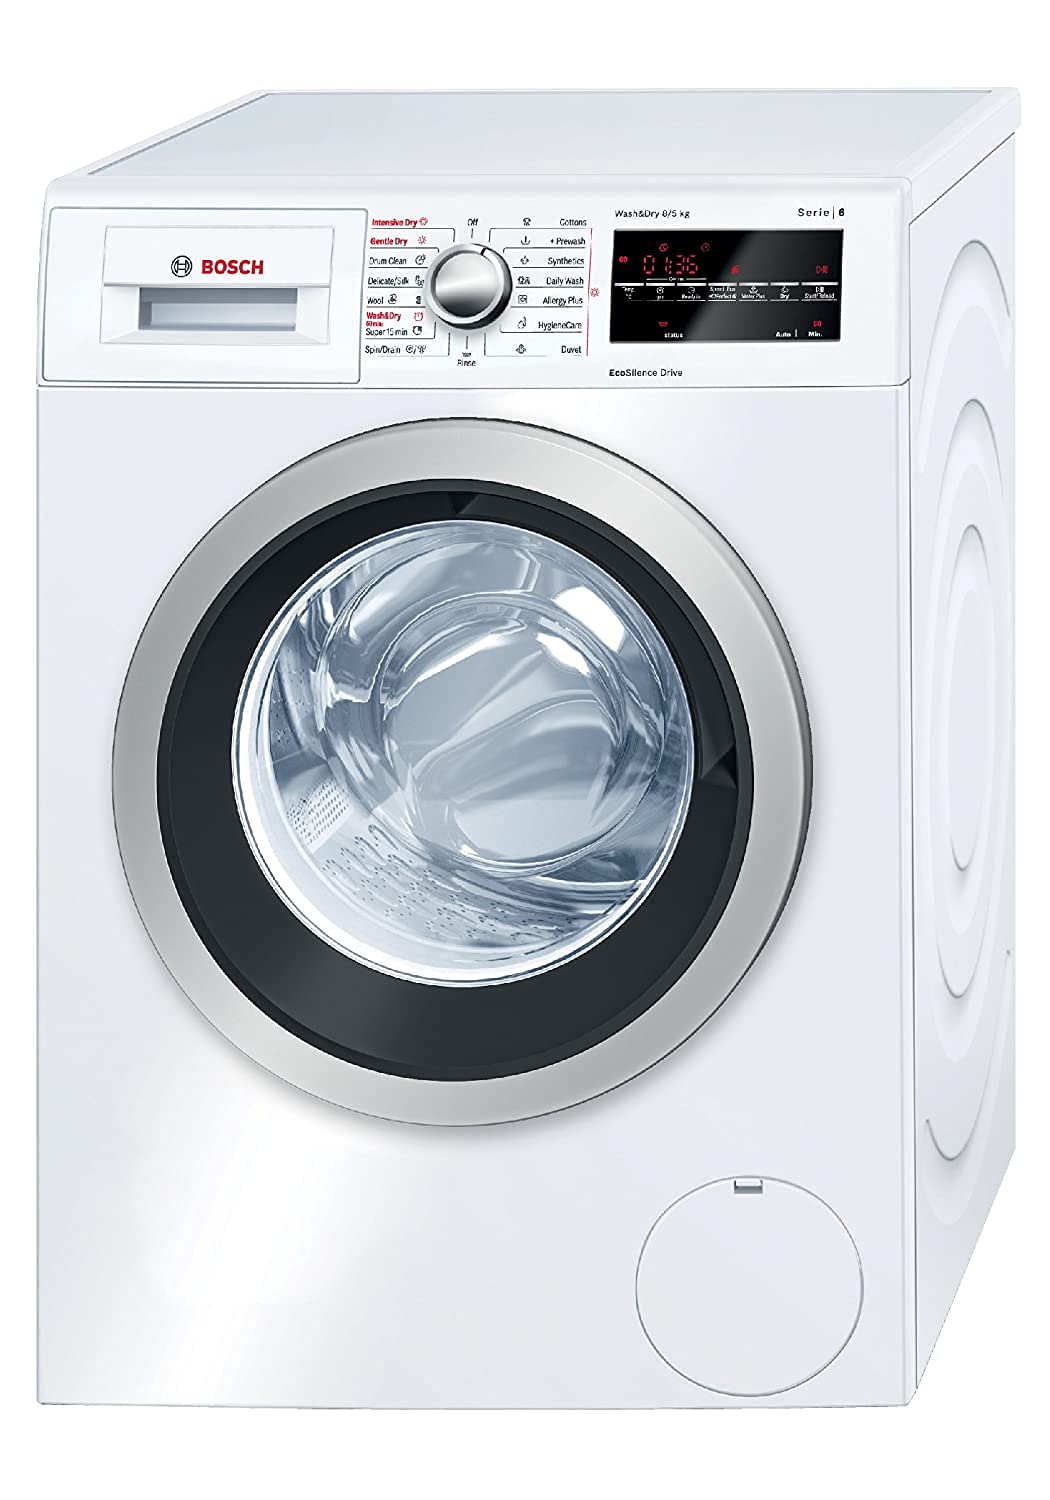 Amazon Deal: This Automatic Washer Dryer will solve the problem of not drying clothes in winter, more than 20 thousand discount in the sale